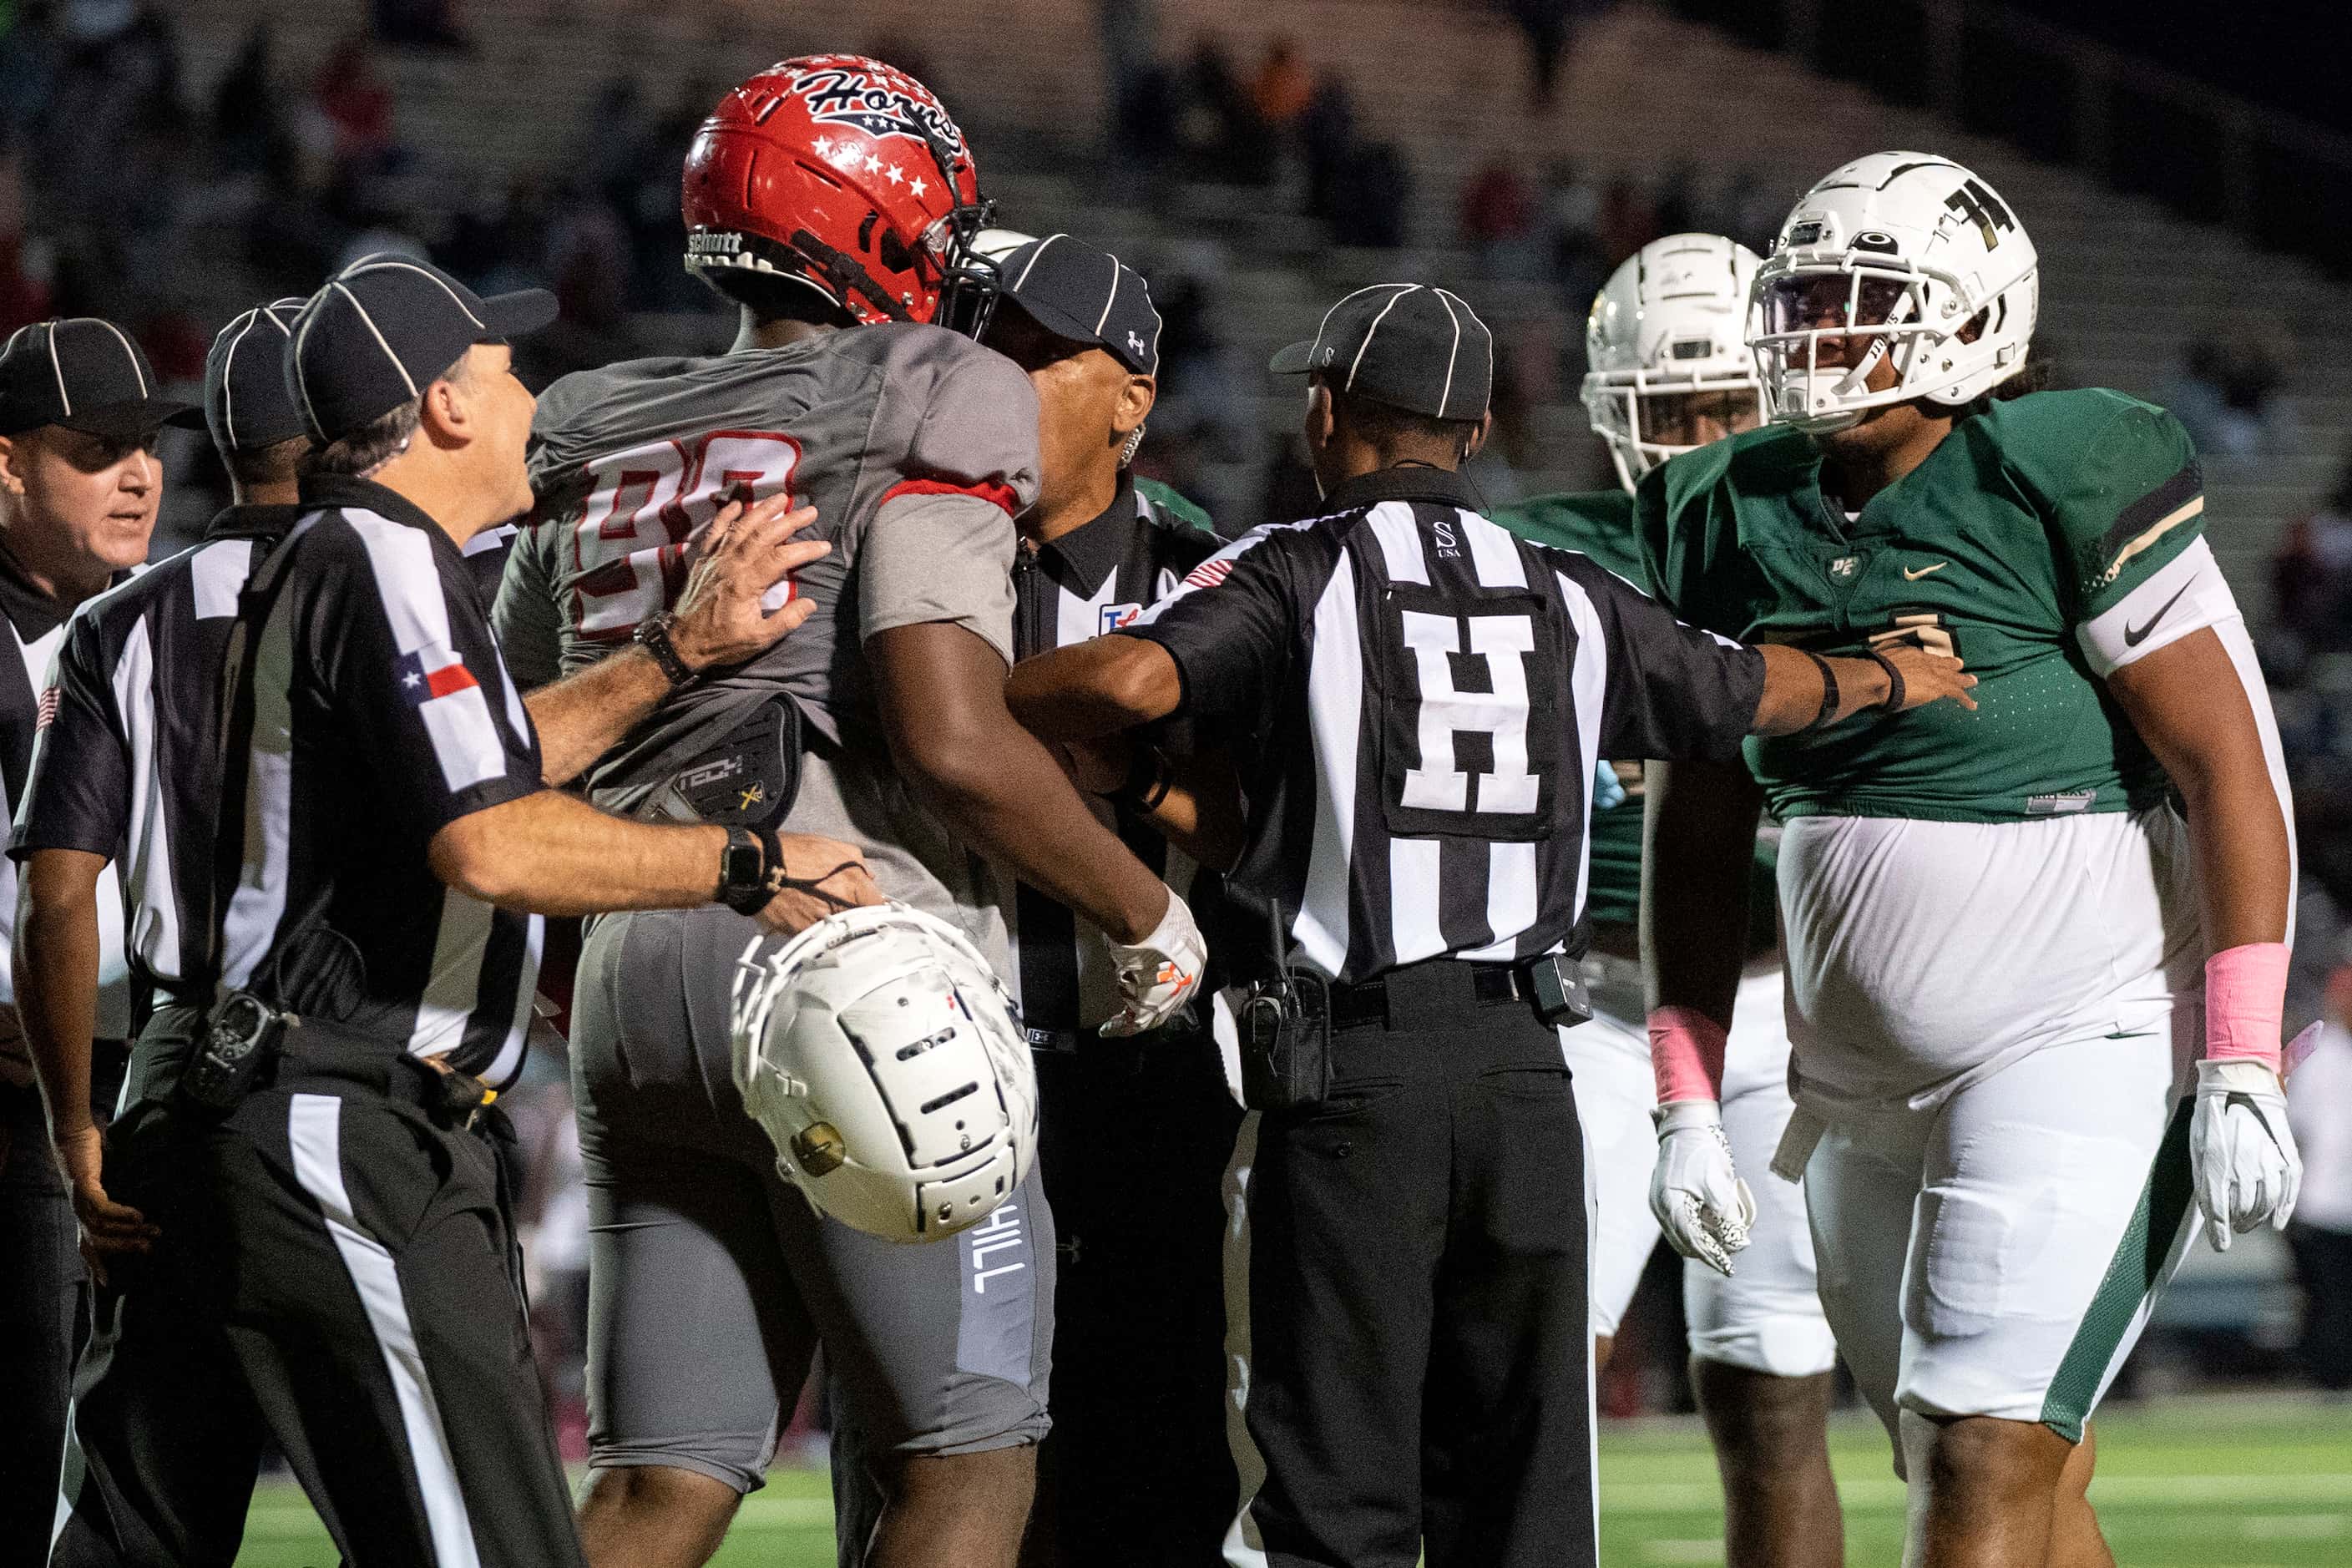 Referees step in to break up extra-curricular activity after the whistle between DeSoto and...